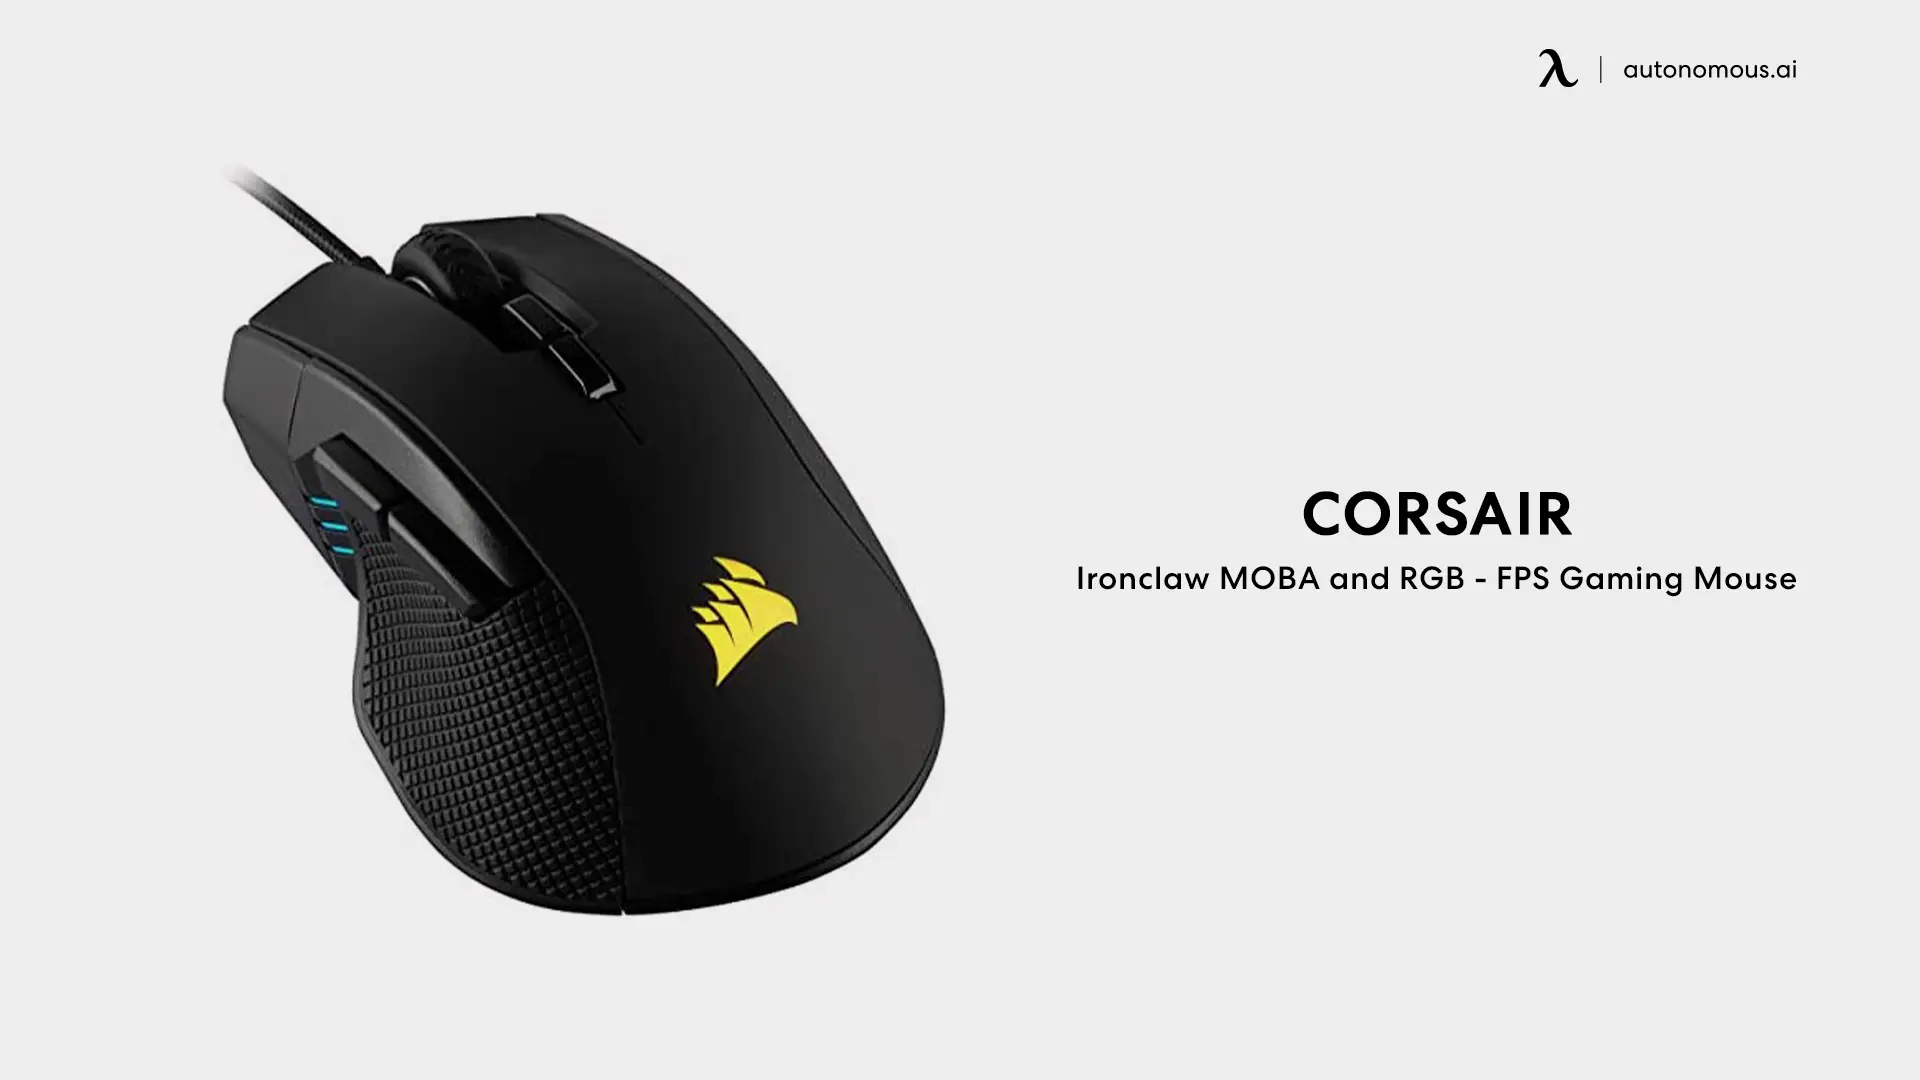 Corsair Ironclaw MOBA and RGB - FPS Gaming Mouse